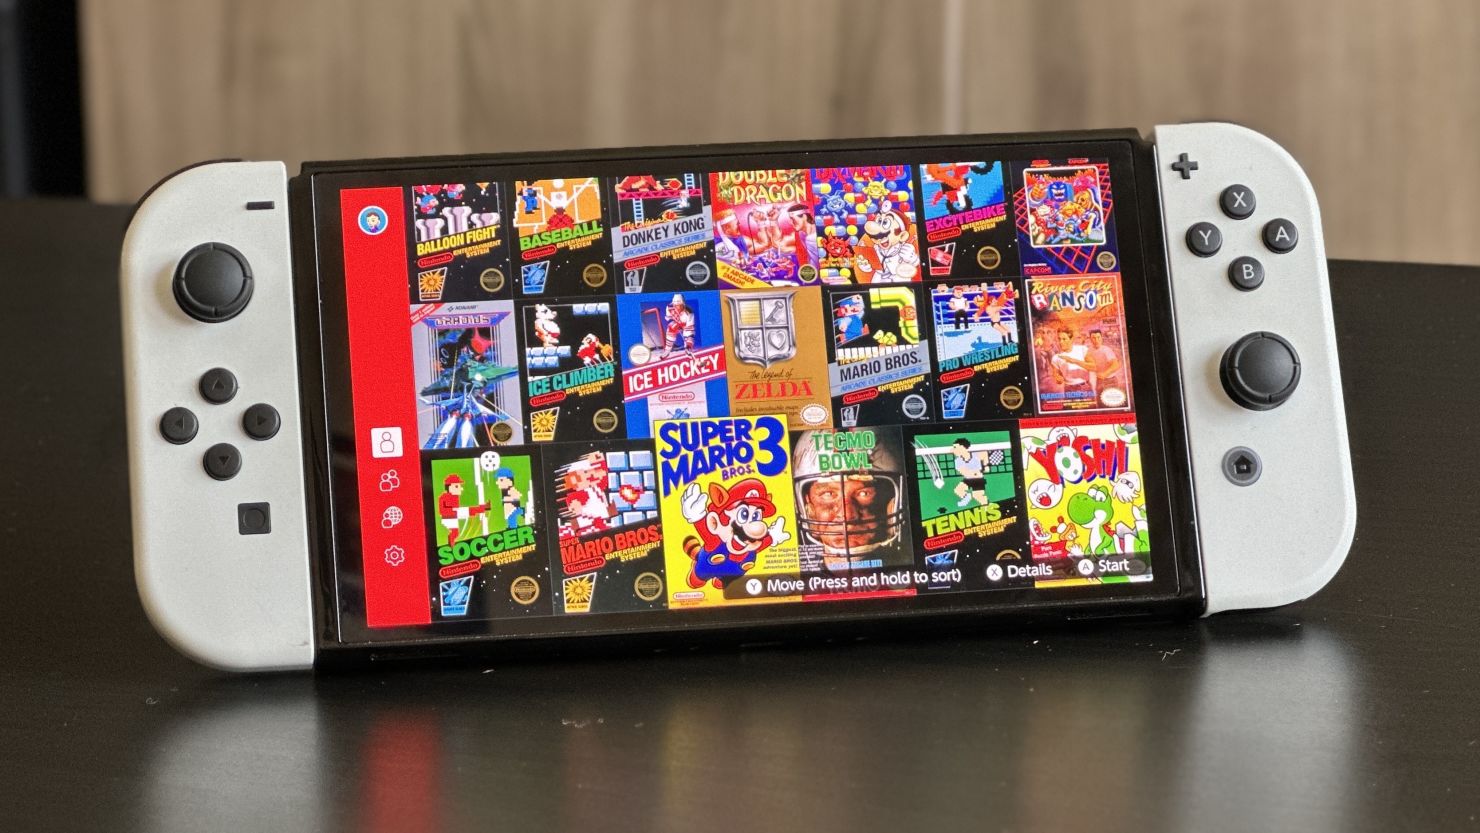 How To Get The Internet Browser On Nintendo Switch OLED In 2024